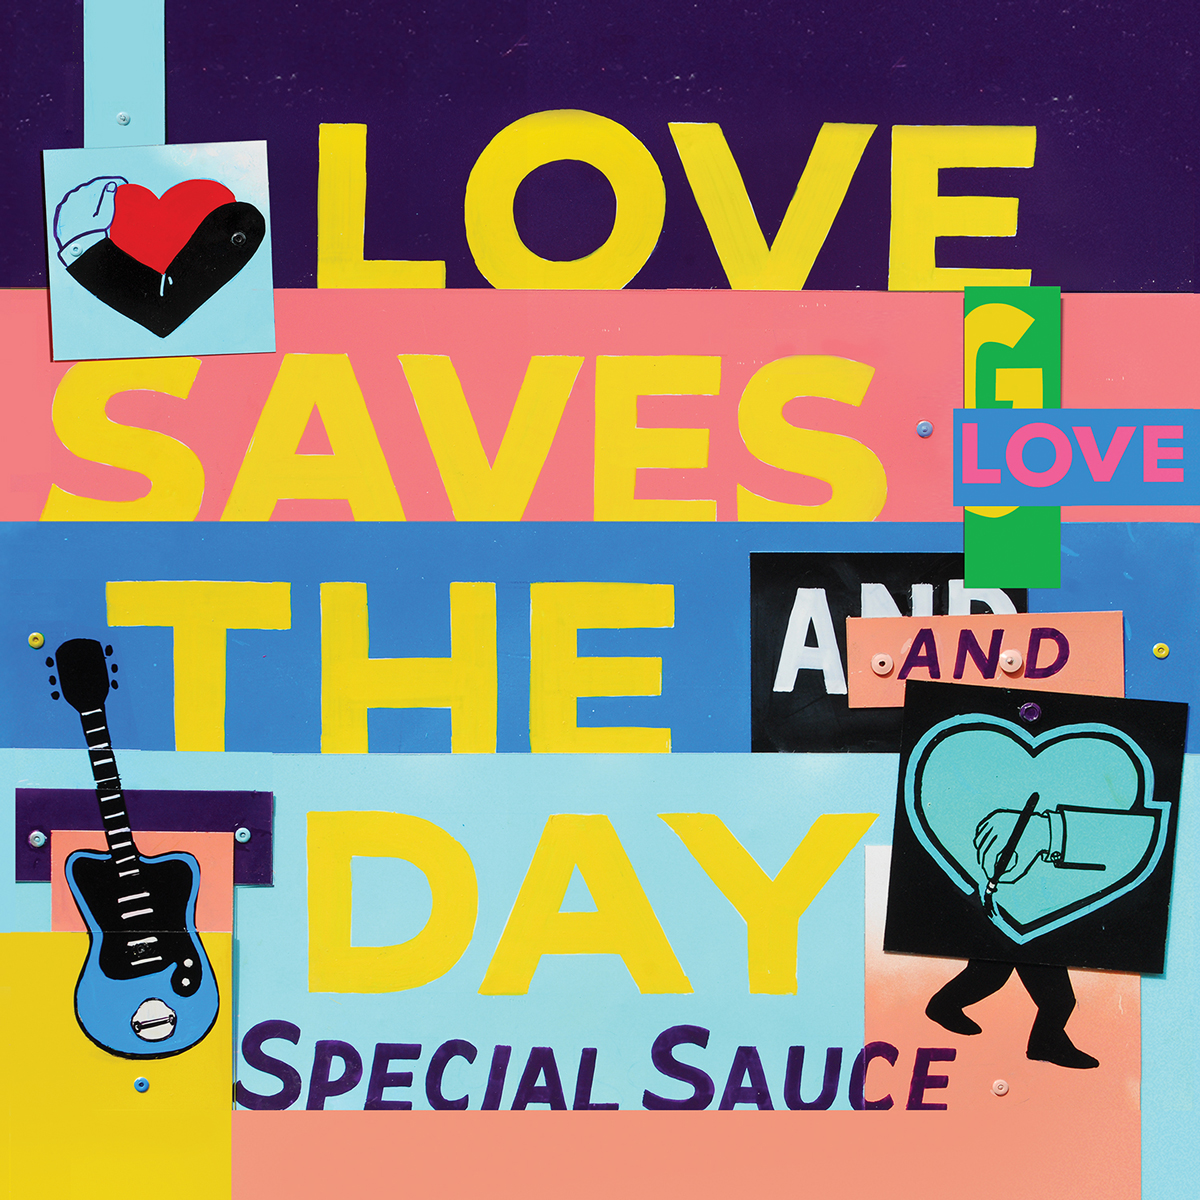 G. Love and the Special Sauce, Loves Saves the Day album cover art. Photo by: G. Love & the Special Sauce